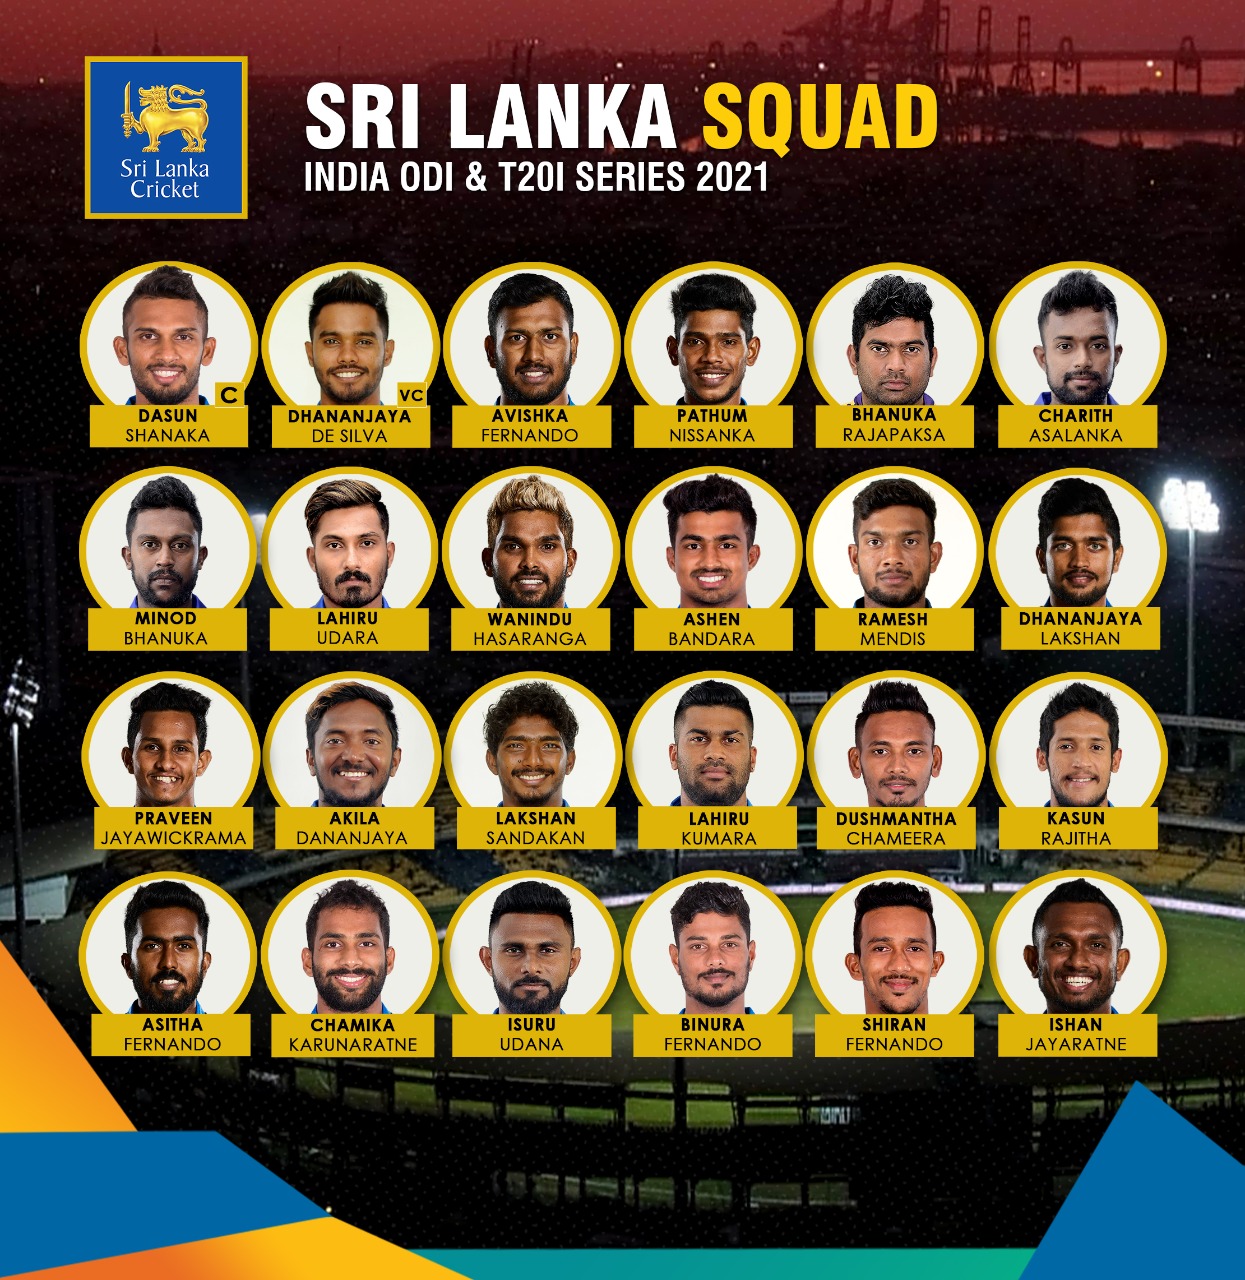 Sri Lanka squad for the limited overs series against India